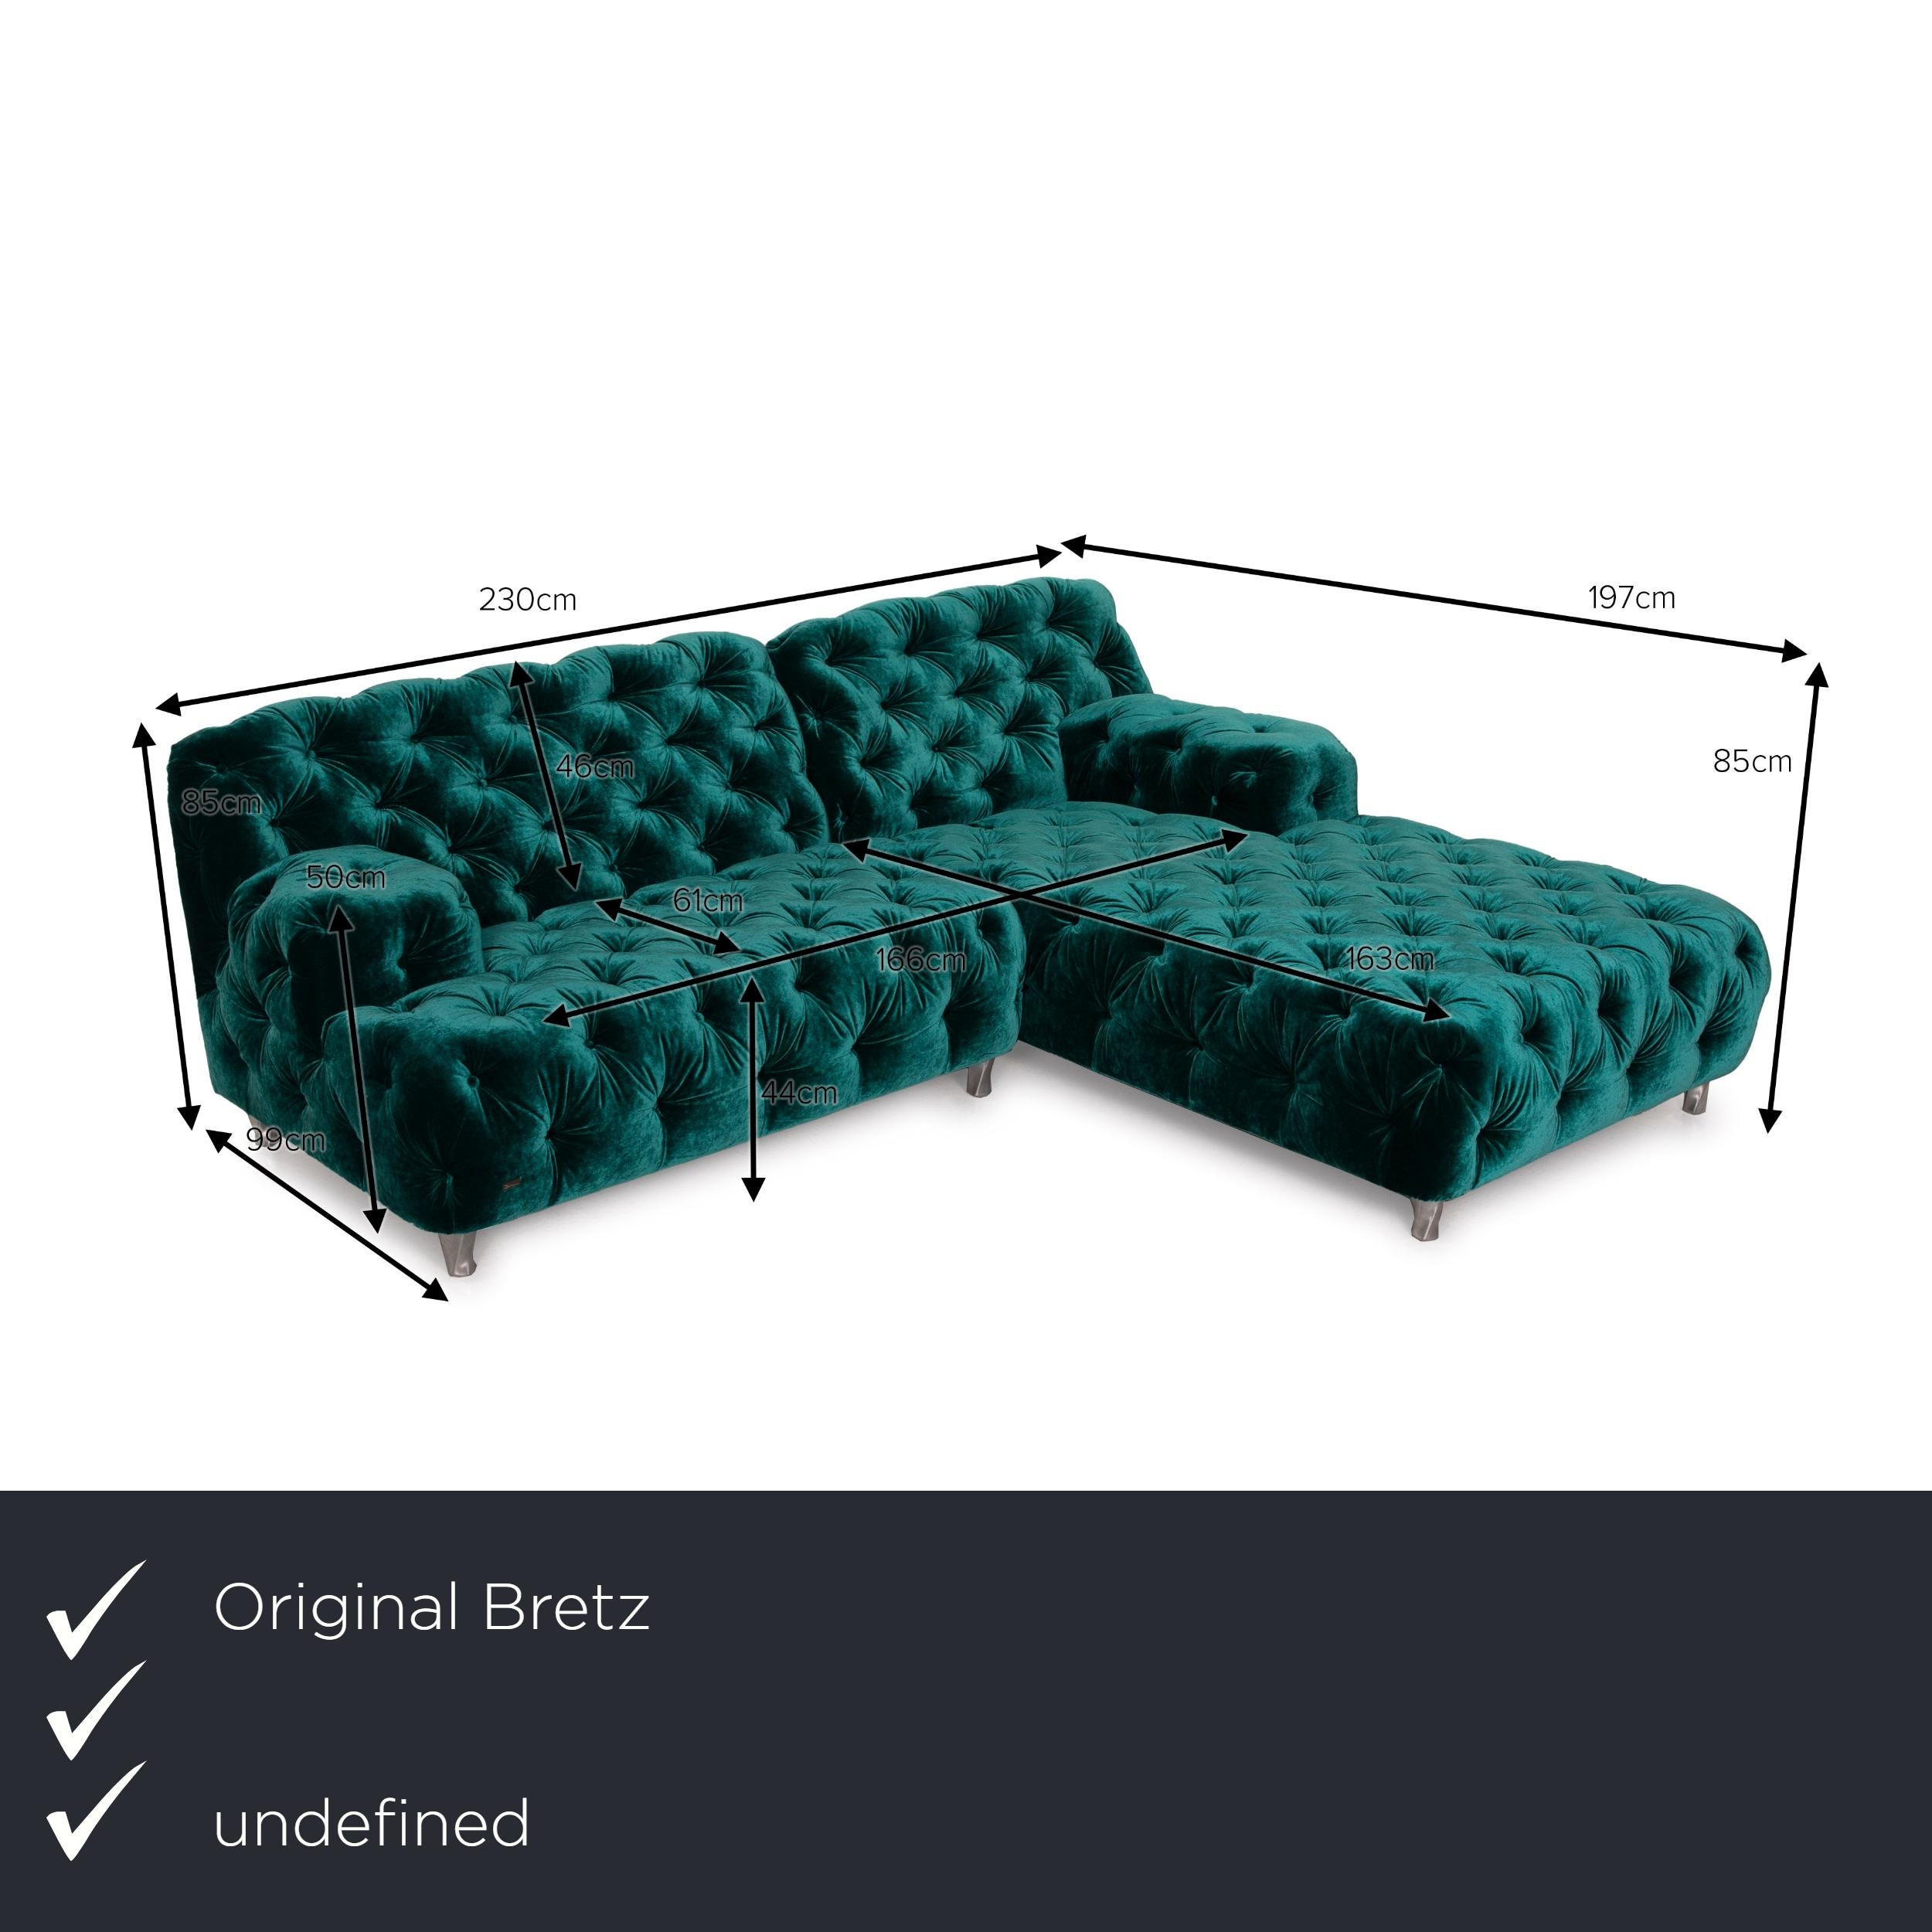 We present to you a Bretz Cocoa Island fabric sofa set green 1x corner sofa 1x stool emerald green.

Product measurements in centimeters:

Depth 99
Width 230
Height 85
Seat height 44
Rest height 50
Seat depth 61
Seat width 166
Back height